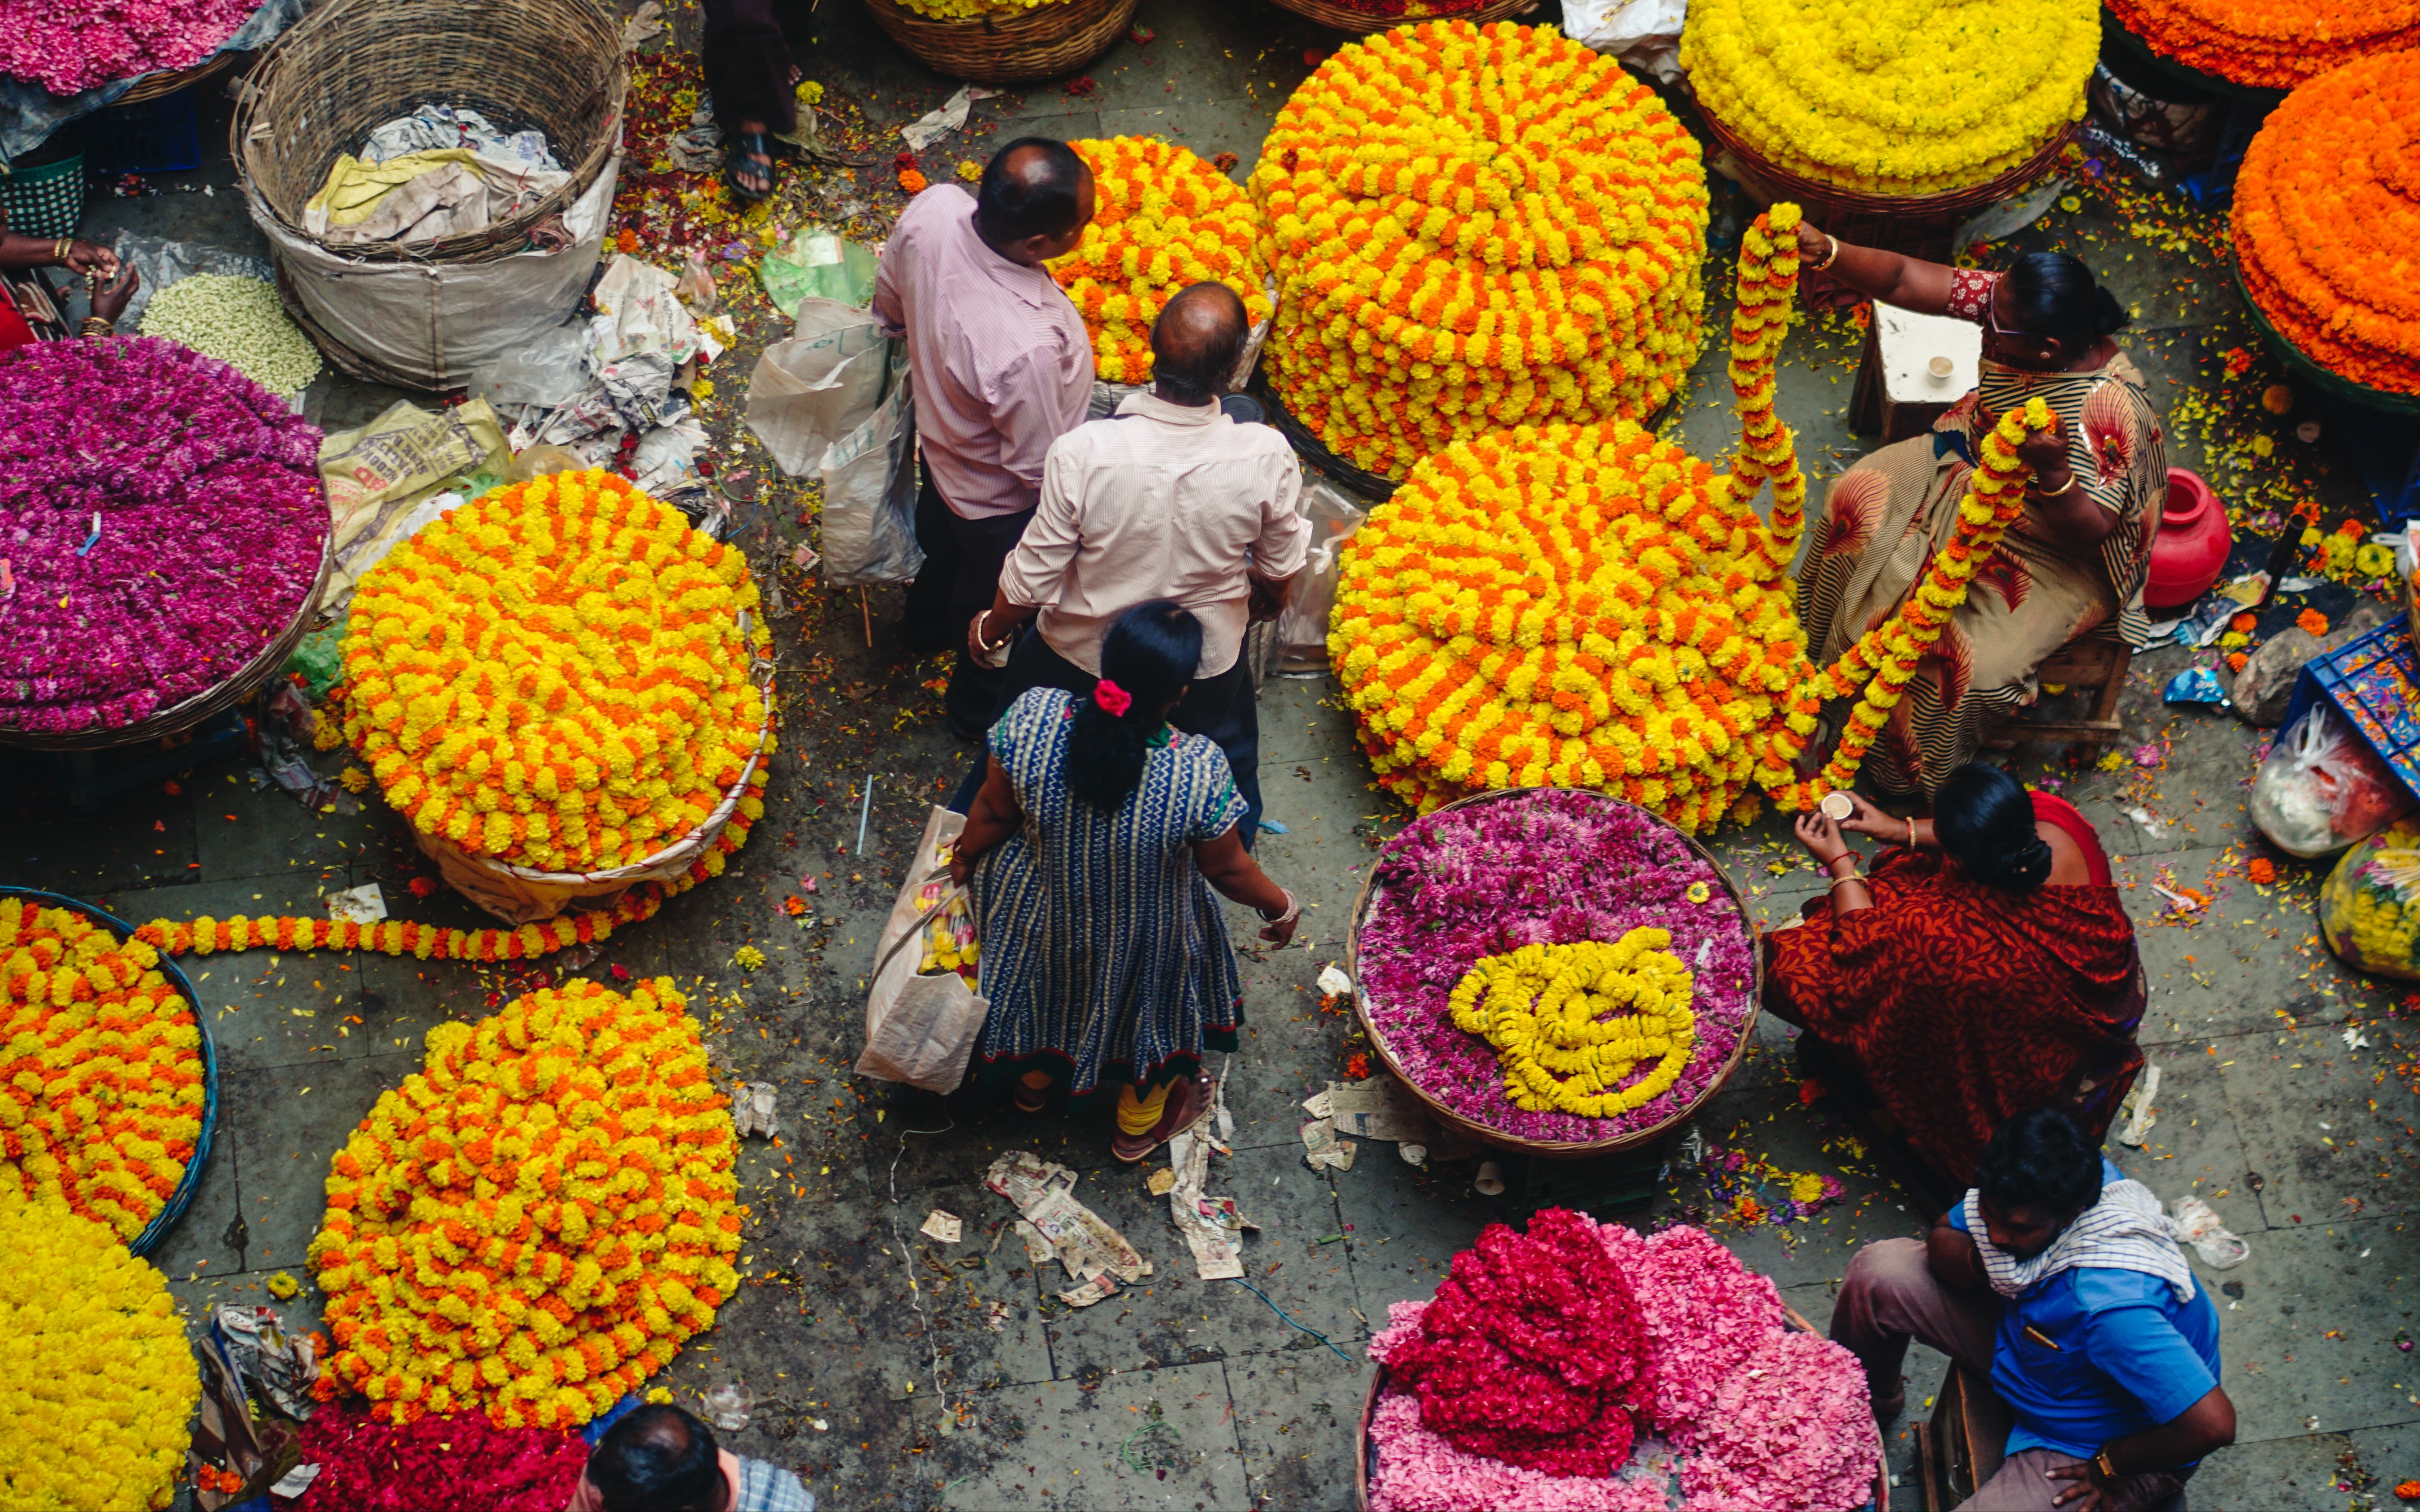 An image of a flower market in Bengaluru